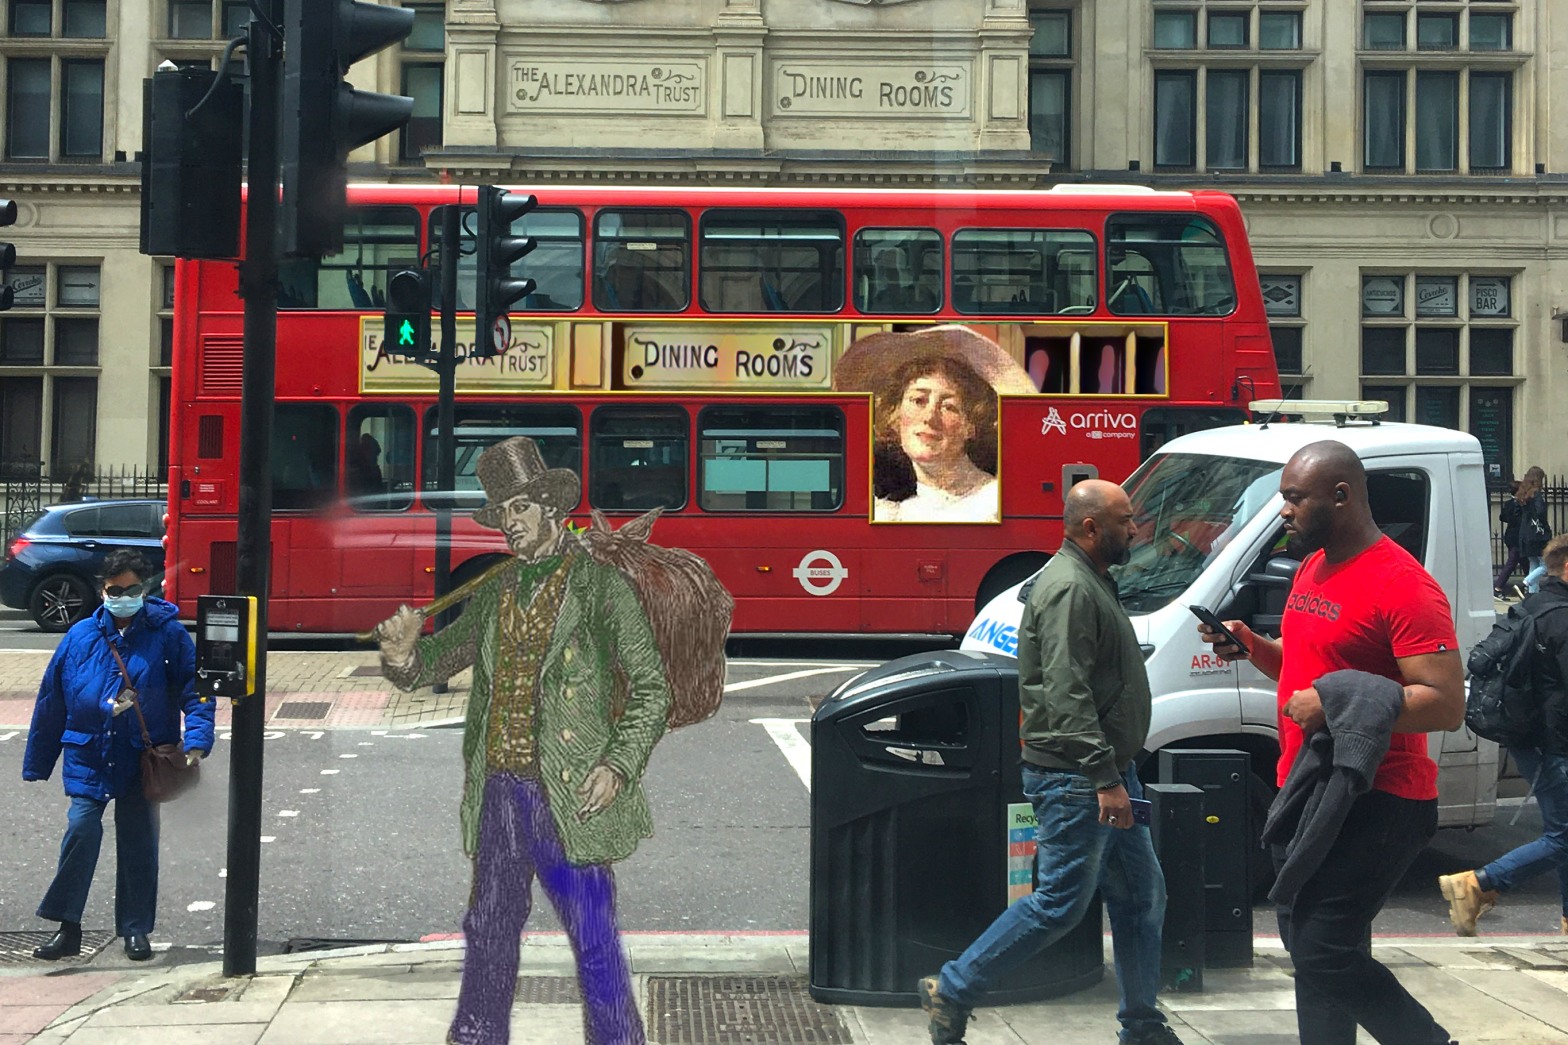 Hand-coloured figure of a man carrying a bindle from "British Workman" No. 9 (1855), p. 35 crossing City Road, where there is a bus with an advertisement featuring the former Alexandra Trust Dining Rooms sign and a figure from Frank Bramley's "Friends" (n.d.), a painting of his wife, Katherine, and her dog